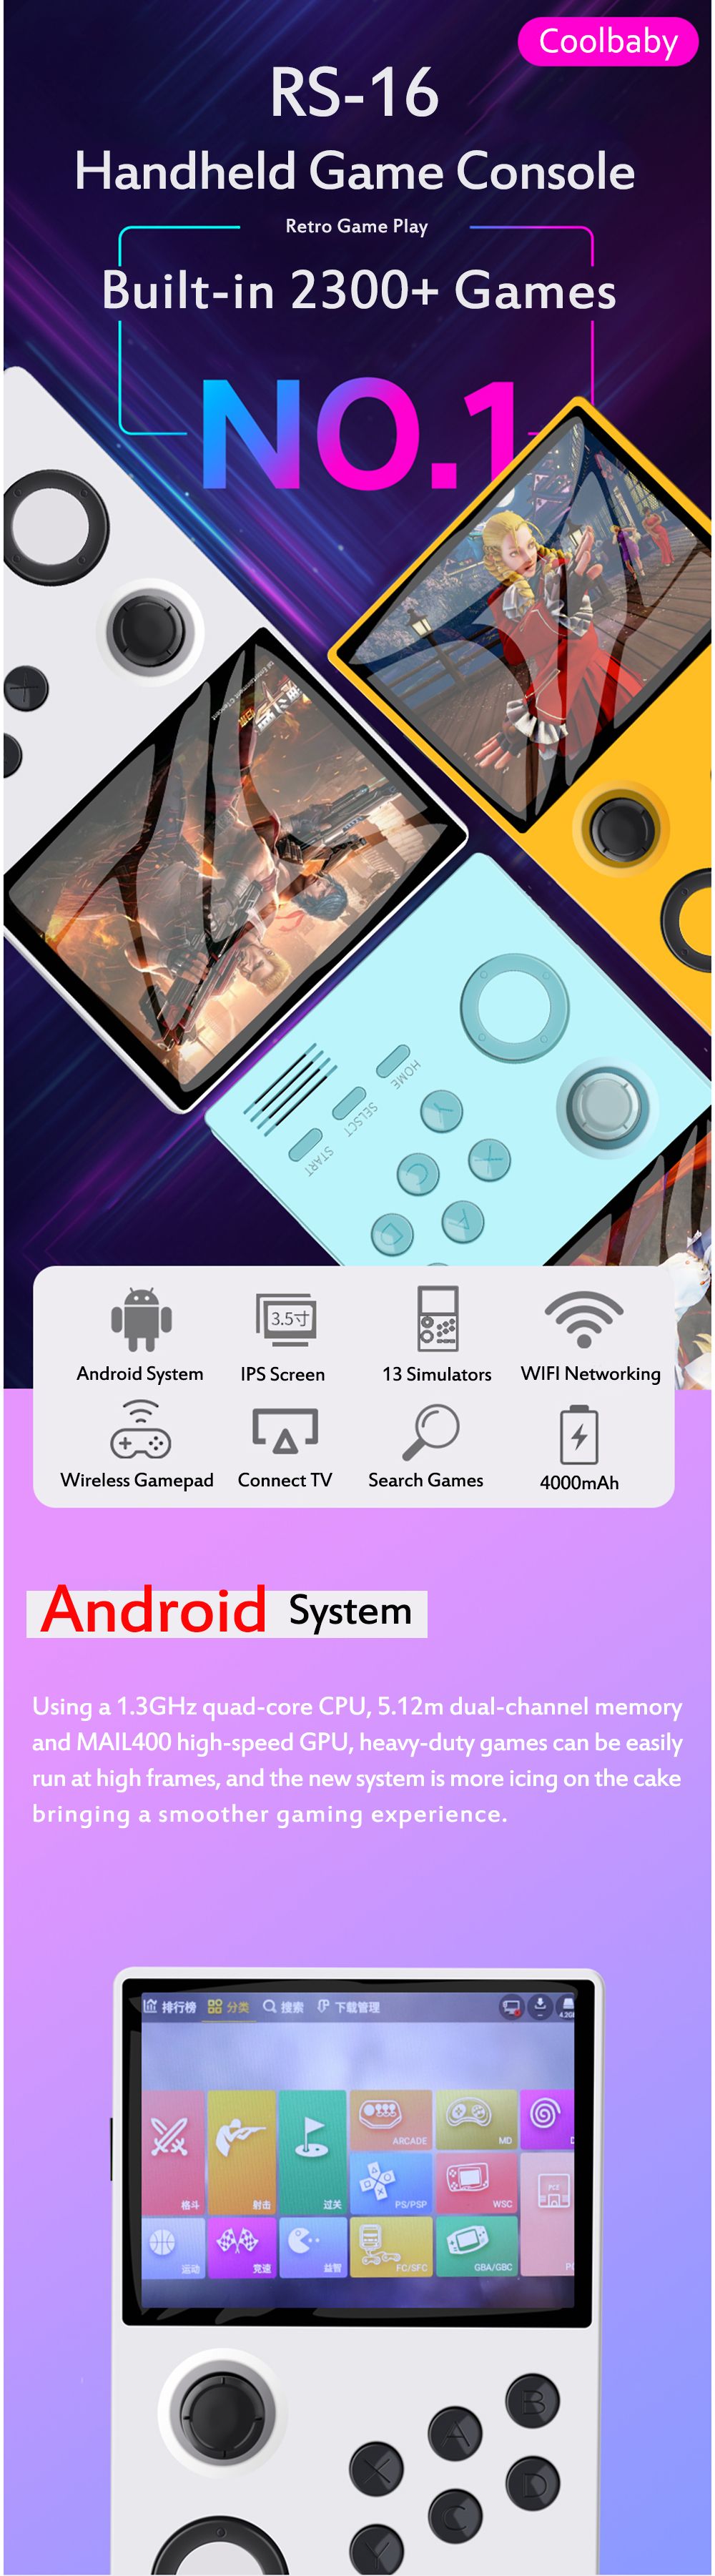 Coolbaby-RS-16-32GB-2300-Games-35-inch-IPS-Screen-Wifi-Handheld-Game-Console-Support-for-Download-Ga-1617078